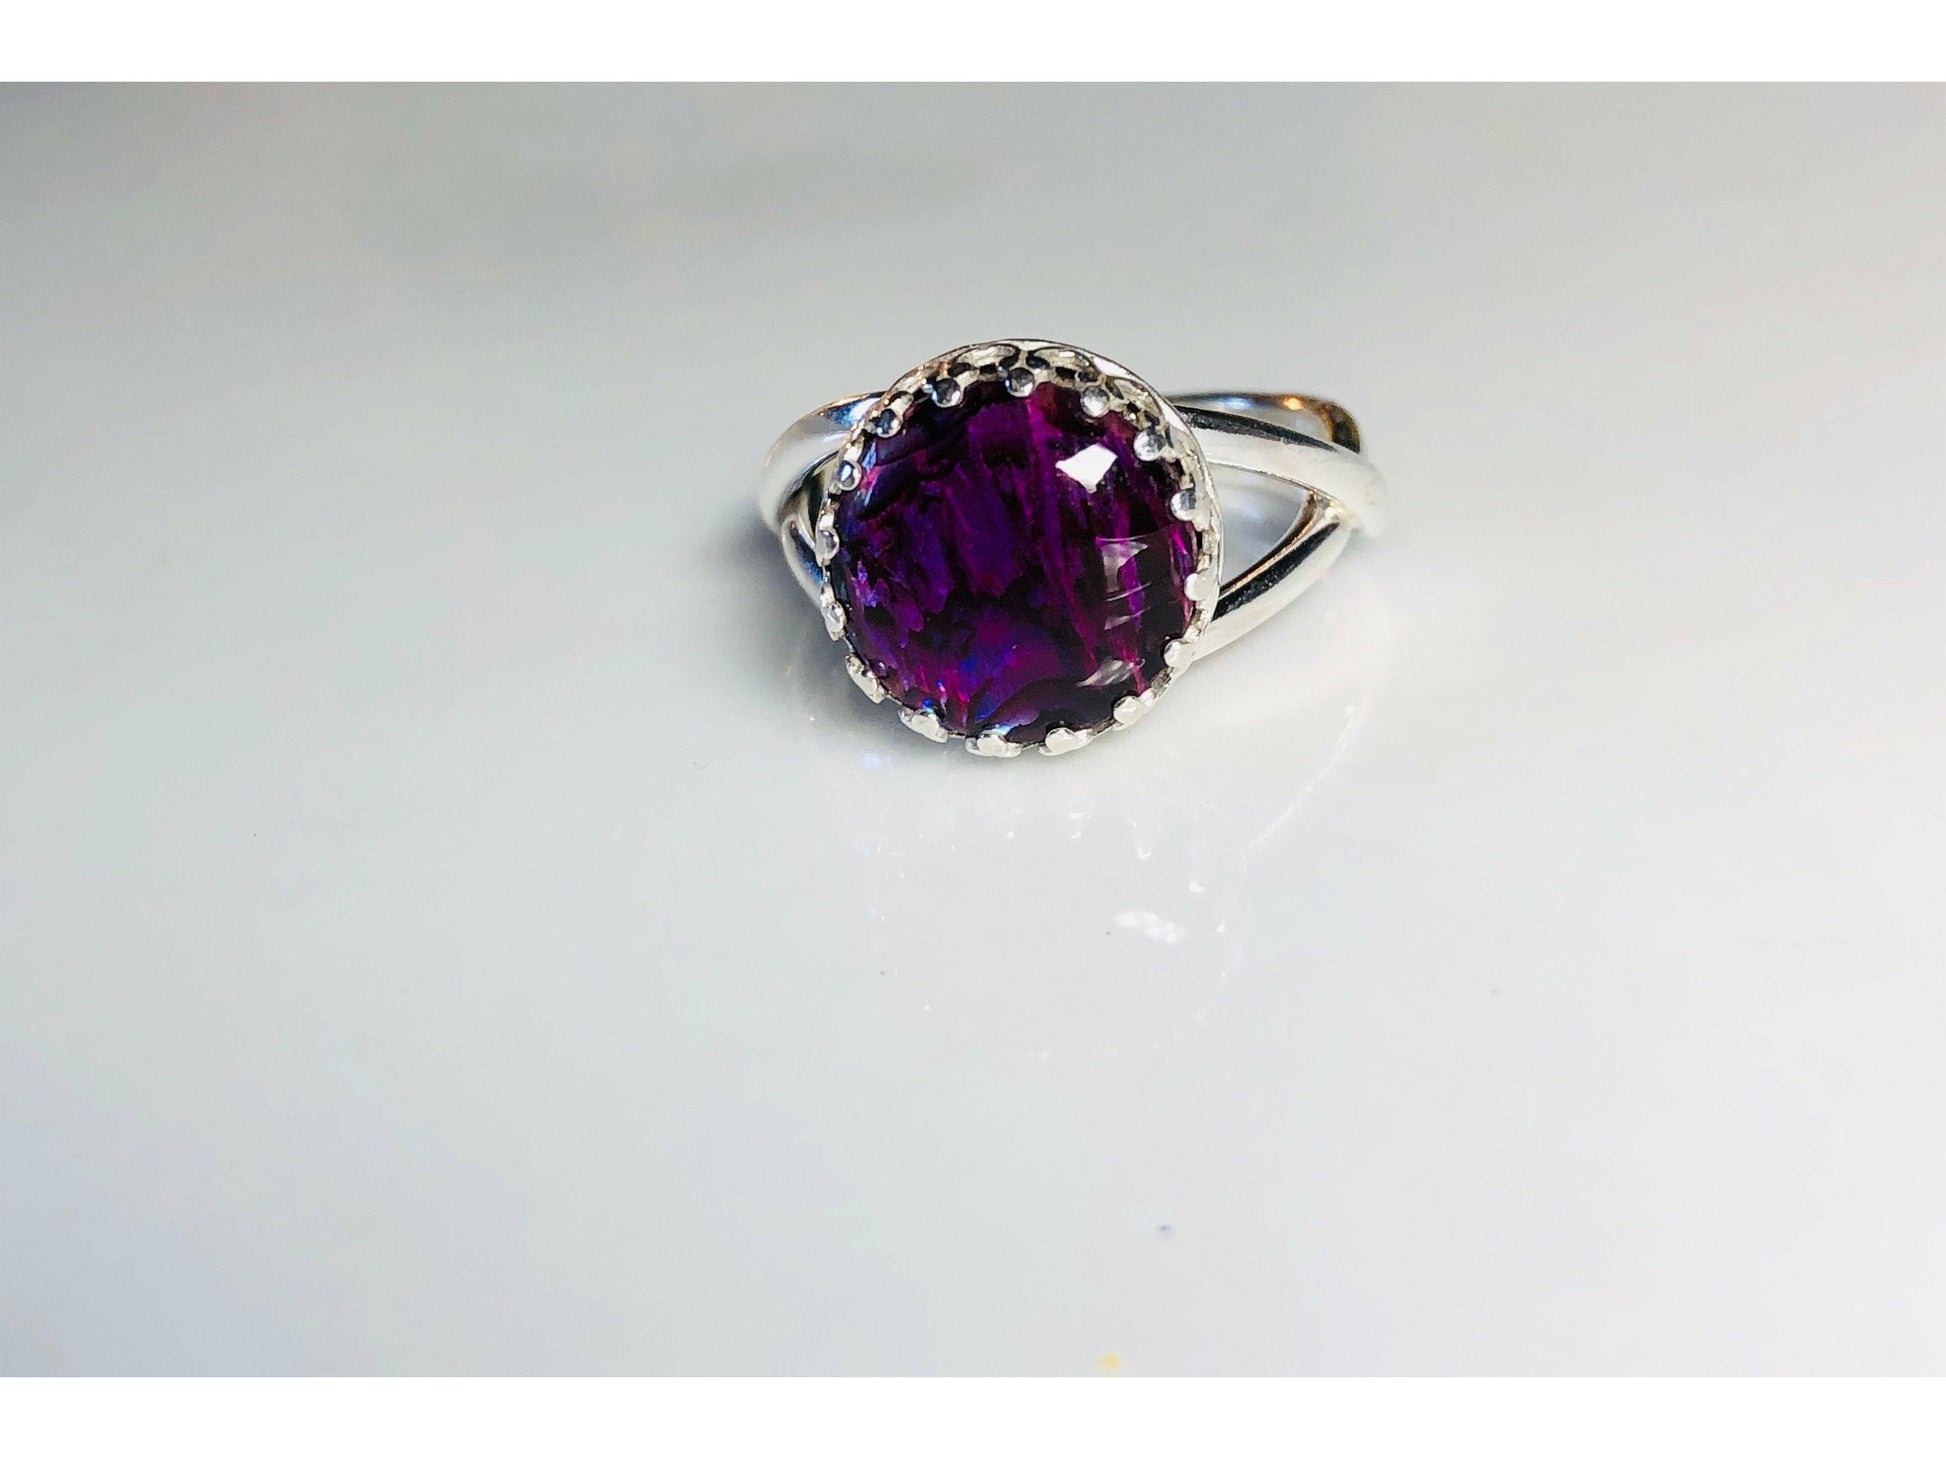 purple-sterling-silver-ring-abalone-ring-sterling-silver-simple-band-boho-ring-purple-ring-sterling-silver-circle-ring-stackable-ring-simple